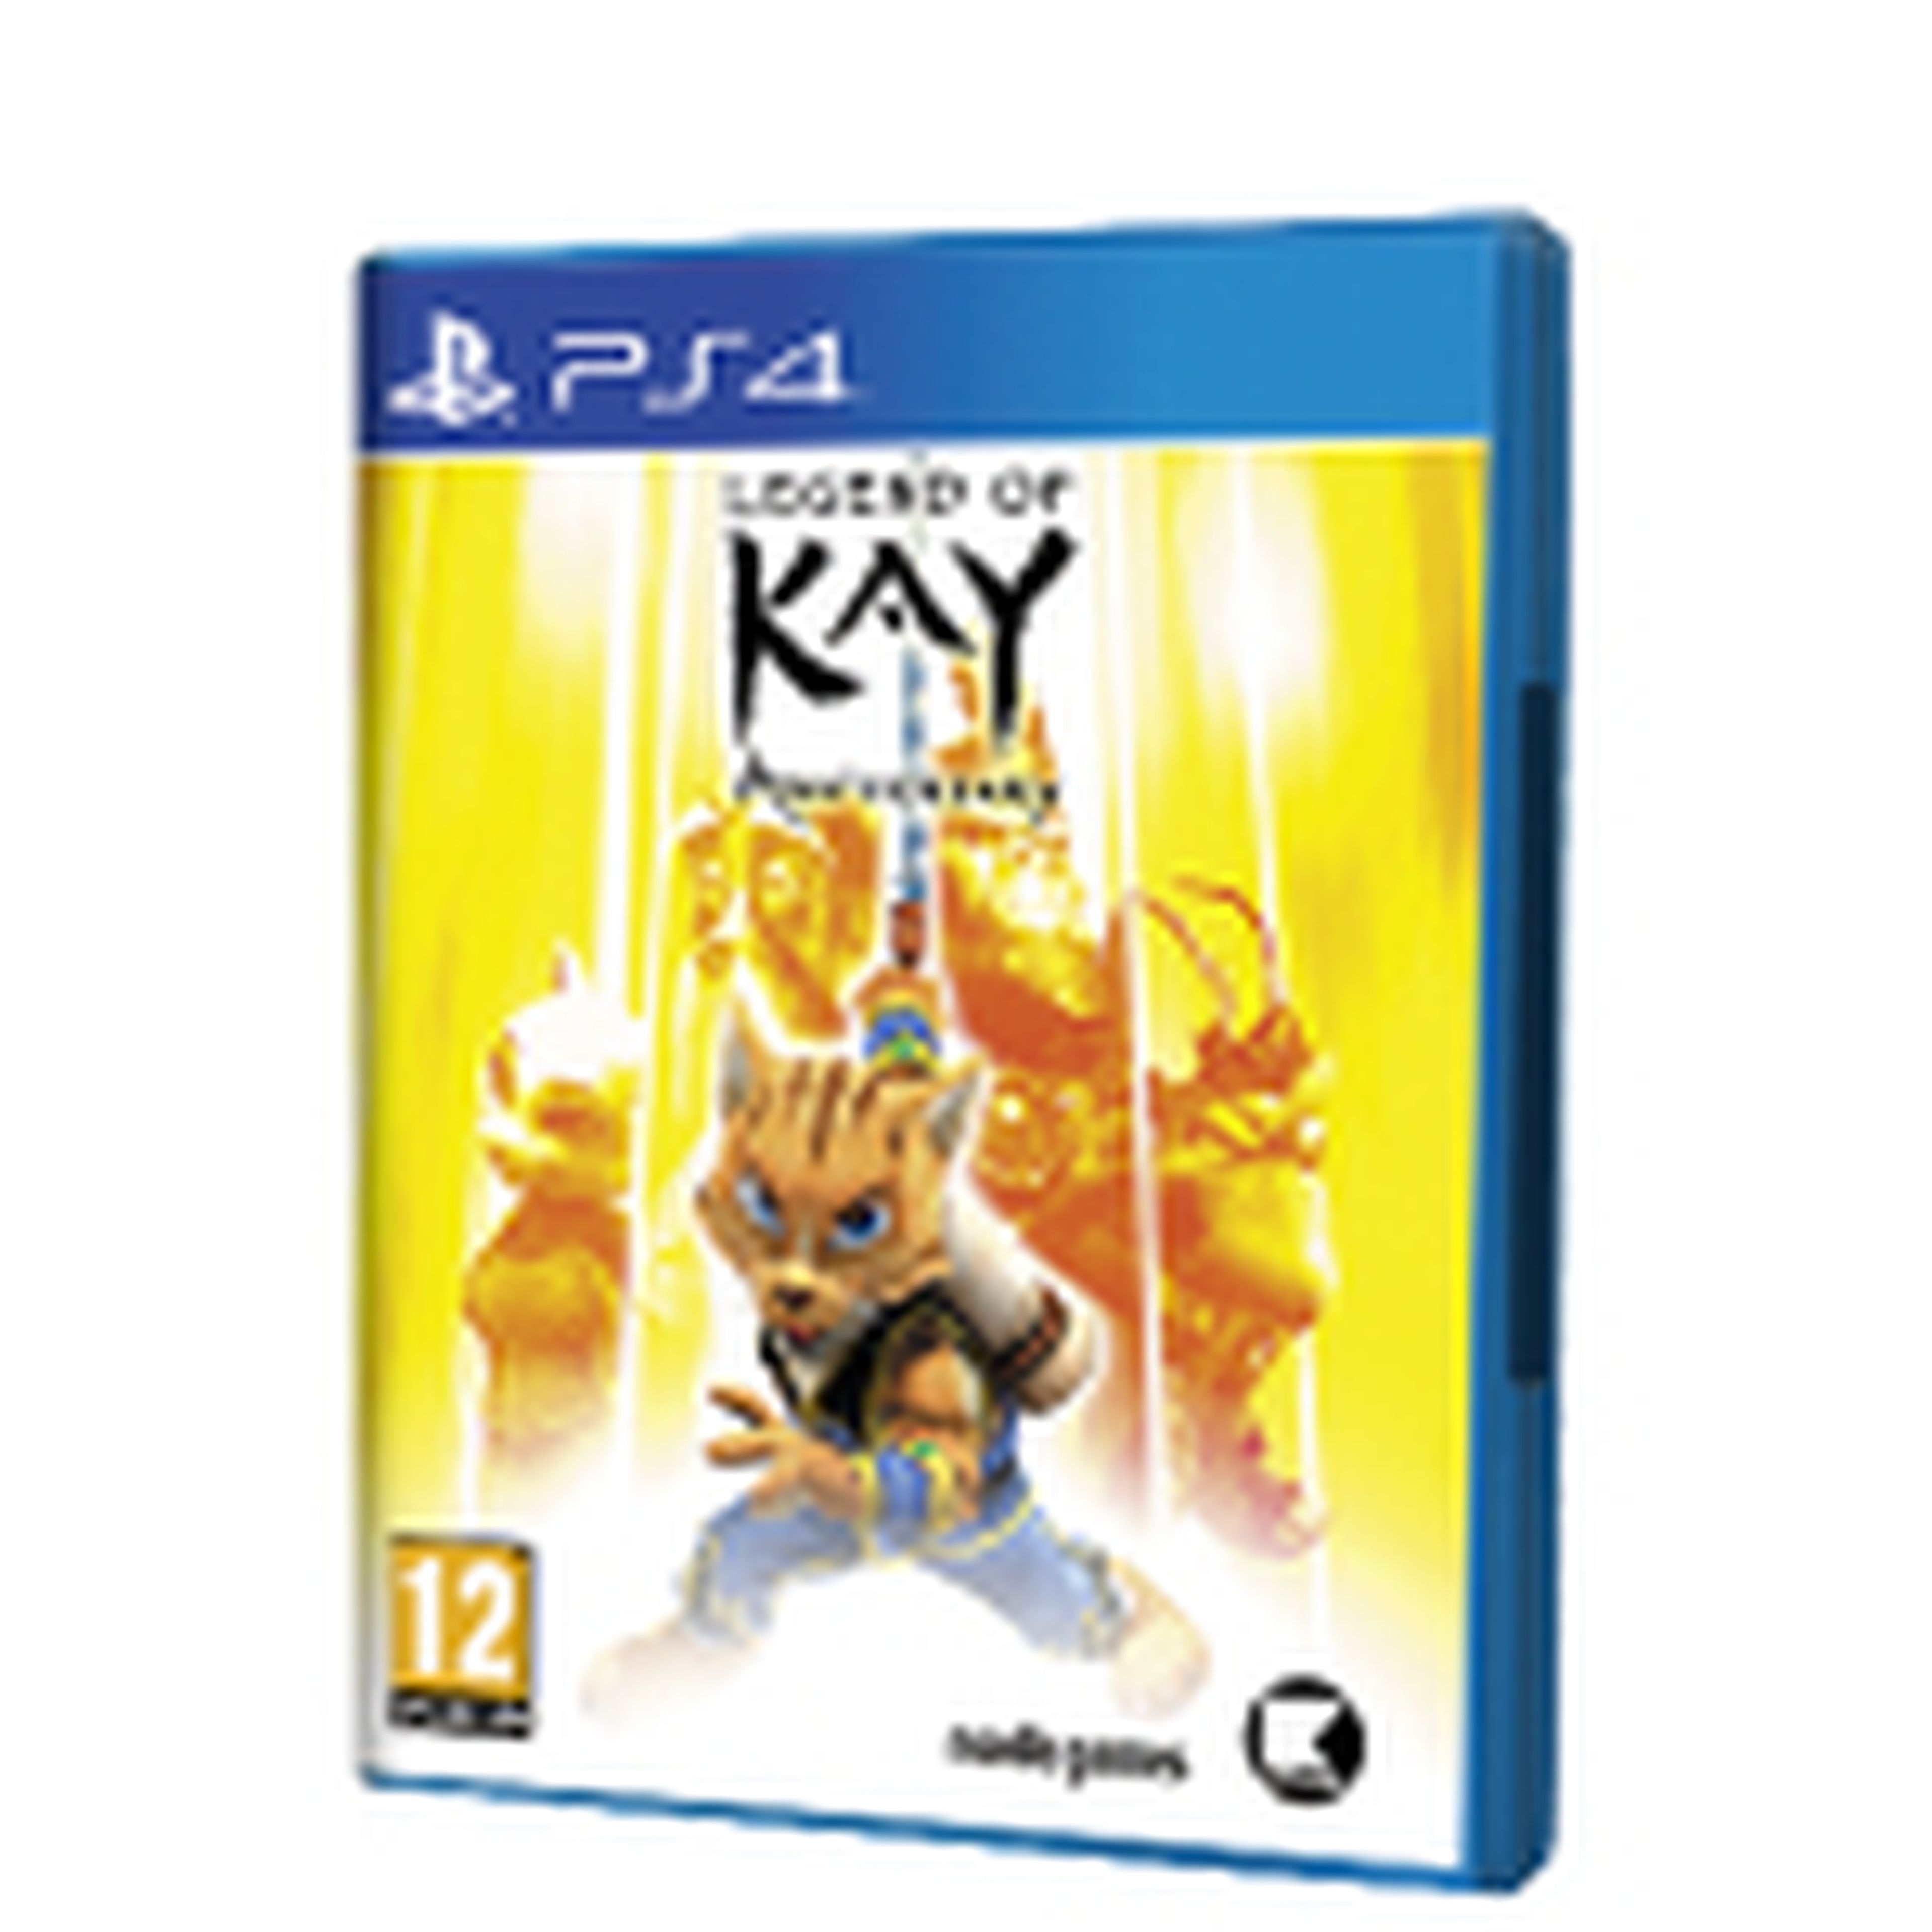 The Legend of Kay Anniversary para PS4